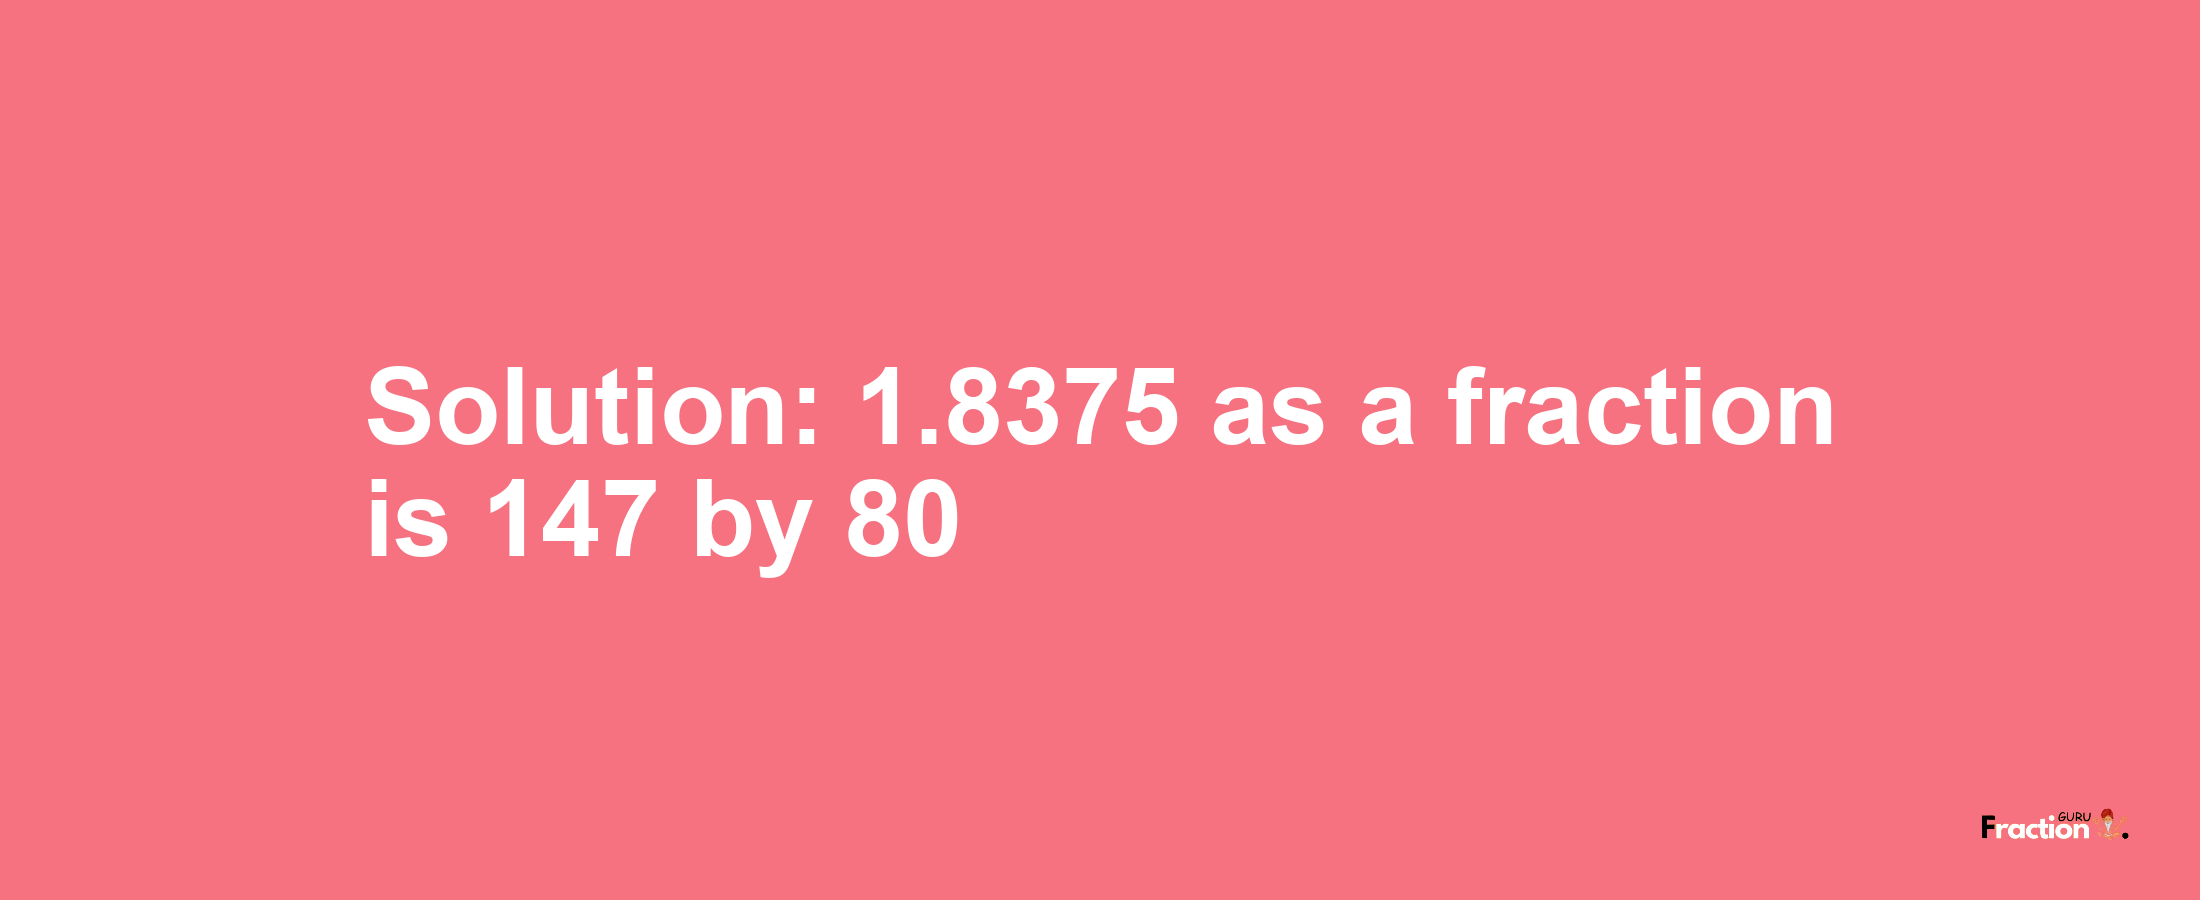 Solution:1.8375 as a fraction is 147/80